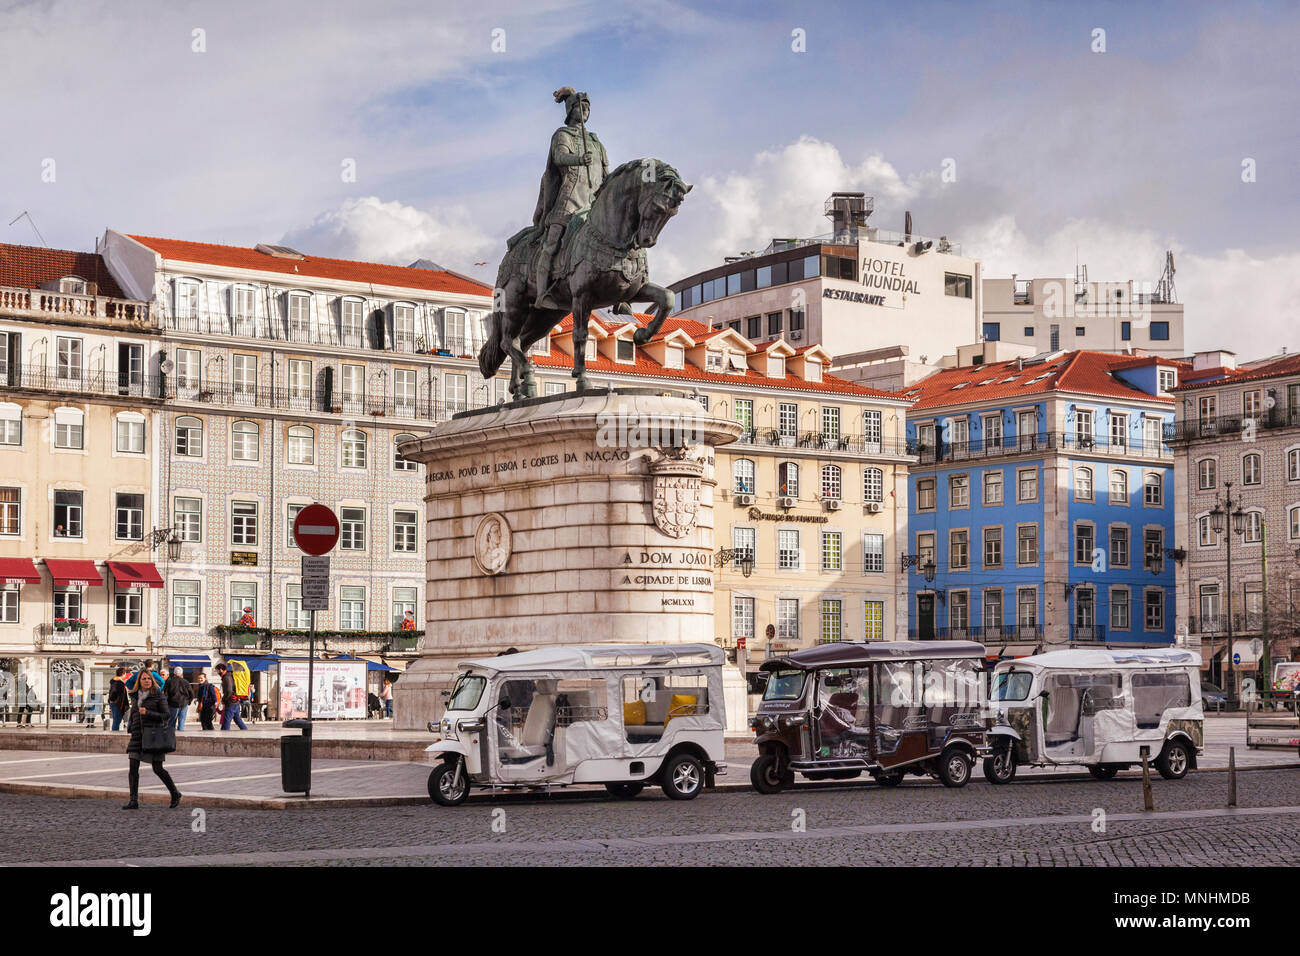 27 February 2018: Lisbon, Portugal - Tuk tuks lined up beneath the equestrian statue of Dom Joao or John 1 in Figueira Plaza on a sunny morning in lat Stock Photo